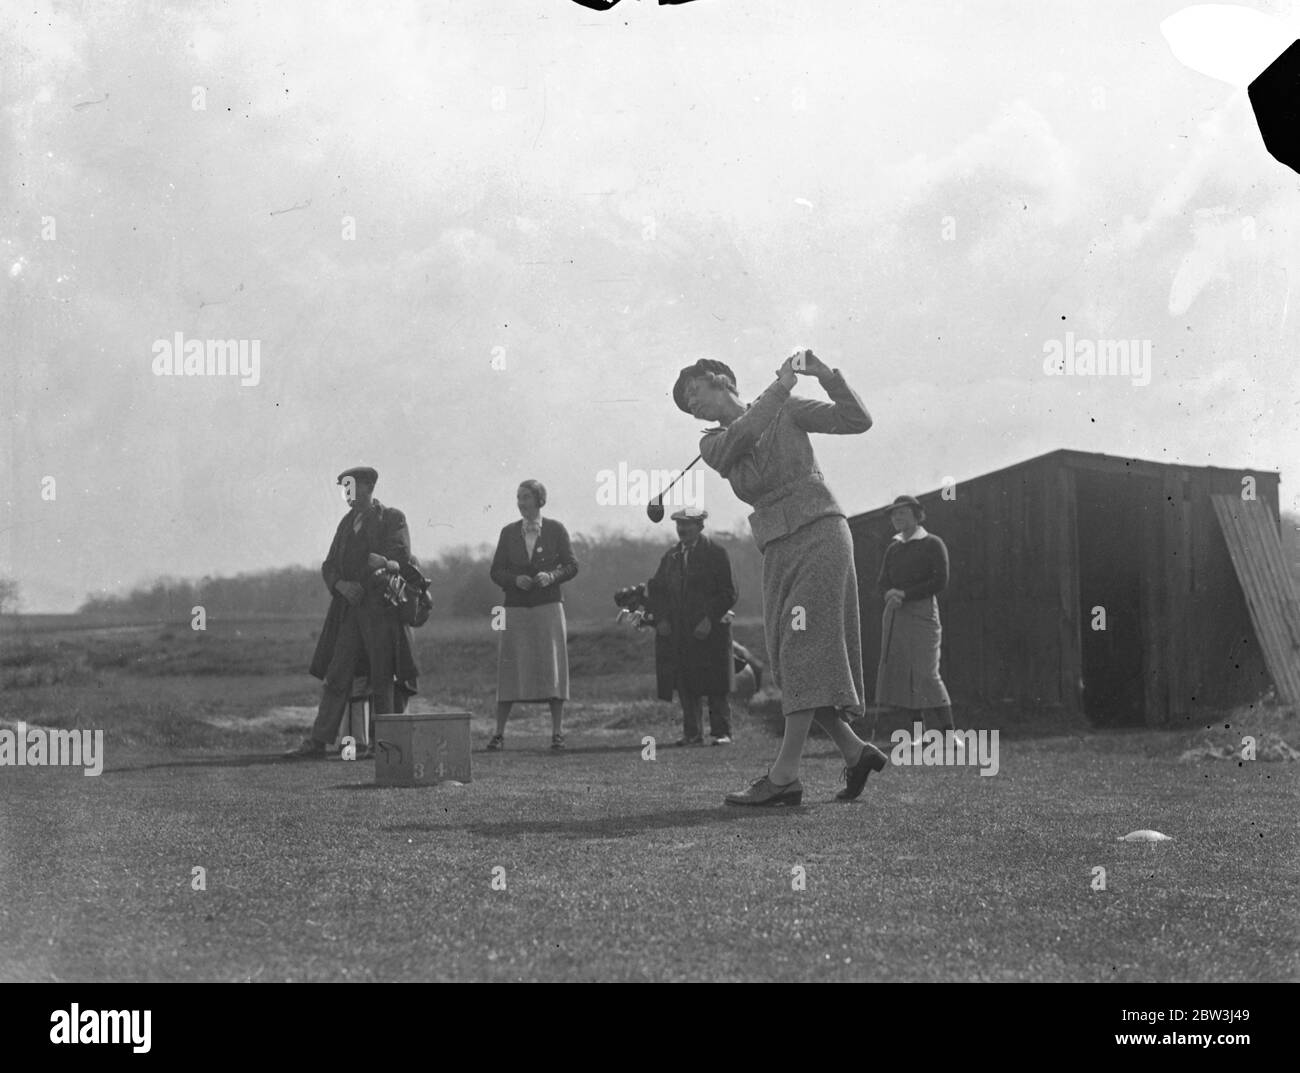 American Curtis cup golfers play against English women at Sandy Lodge . Patty Berg watches Joyce Wethered . The United States women ' s golf team who are to defend the Curtis Cup against Britain on May 6 , met a team of well known English golfers who are not include in the British side in a friendly match at Sandy Lodge . Photo shows , Miss Joyce Wethered of England driving from the second tee watched by Miss Patty Berg , 18 year old American wonder golfer right ( right ) . 27 April 1936 Stock Photo